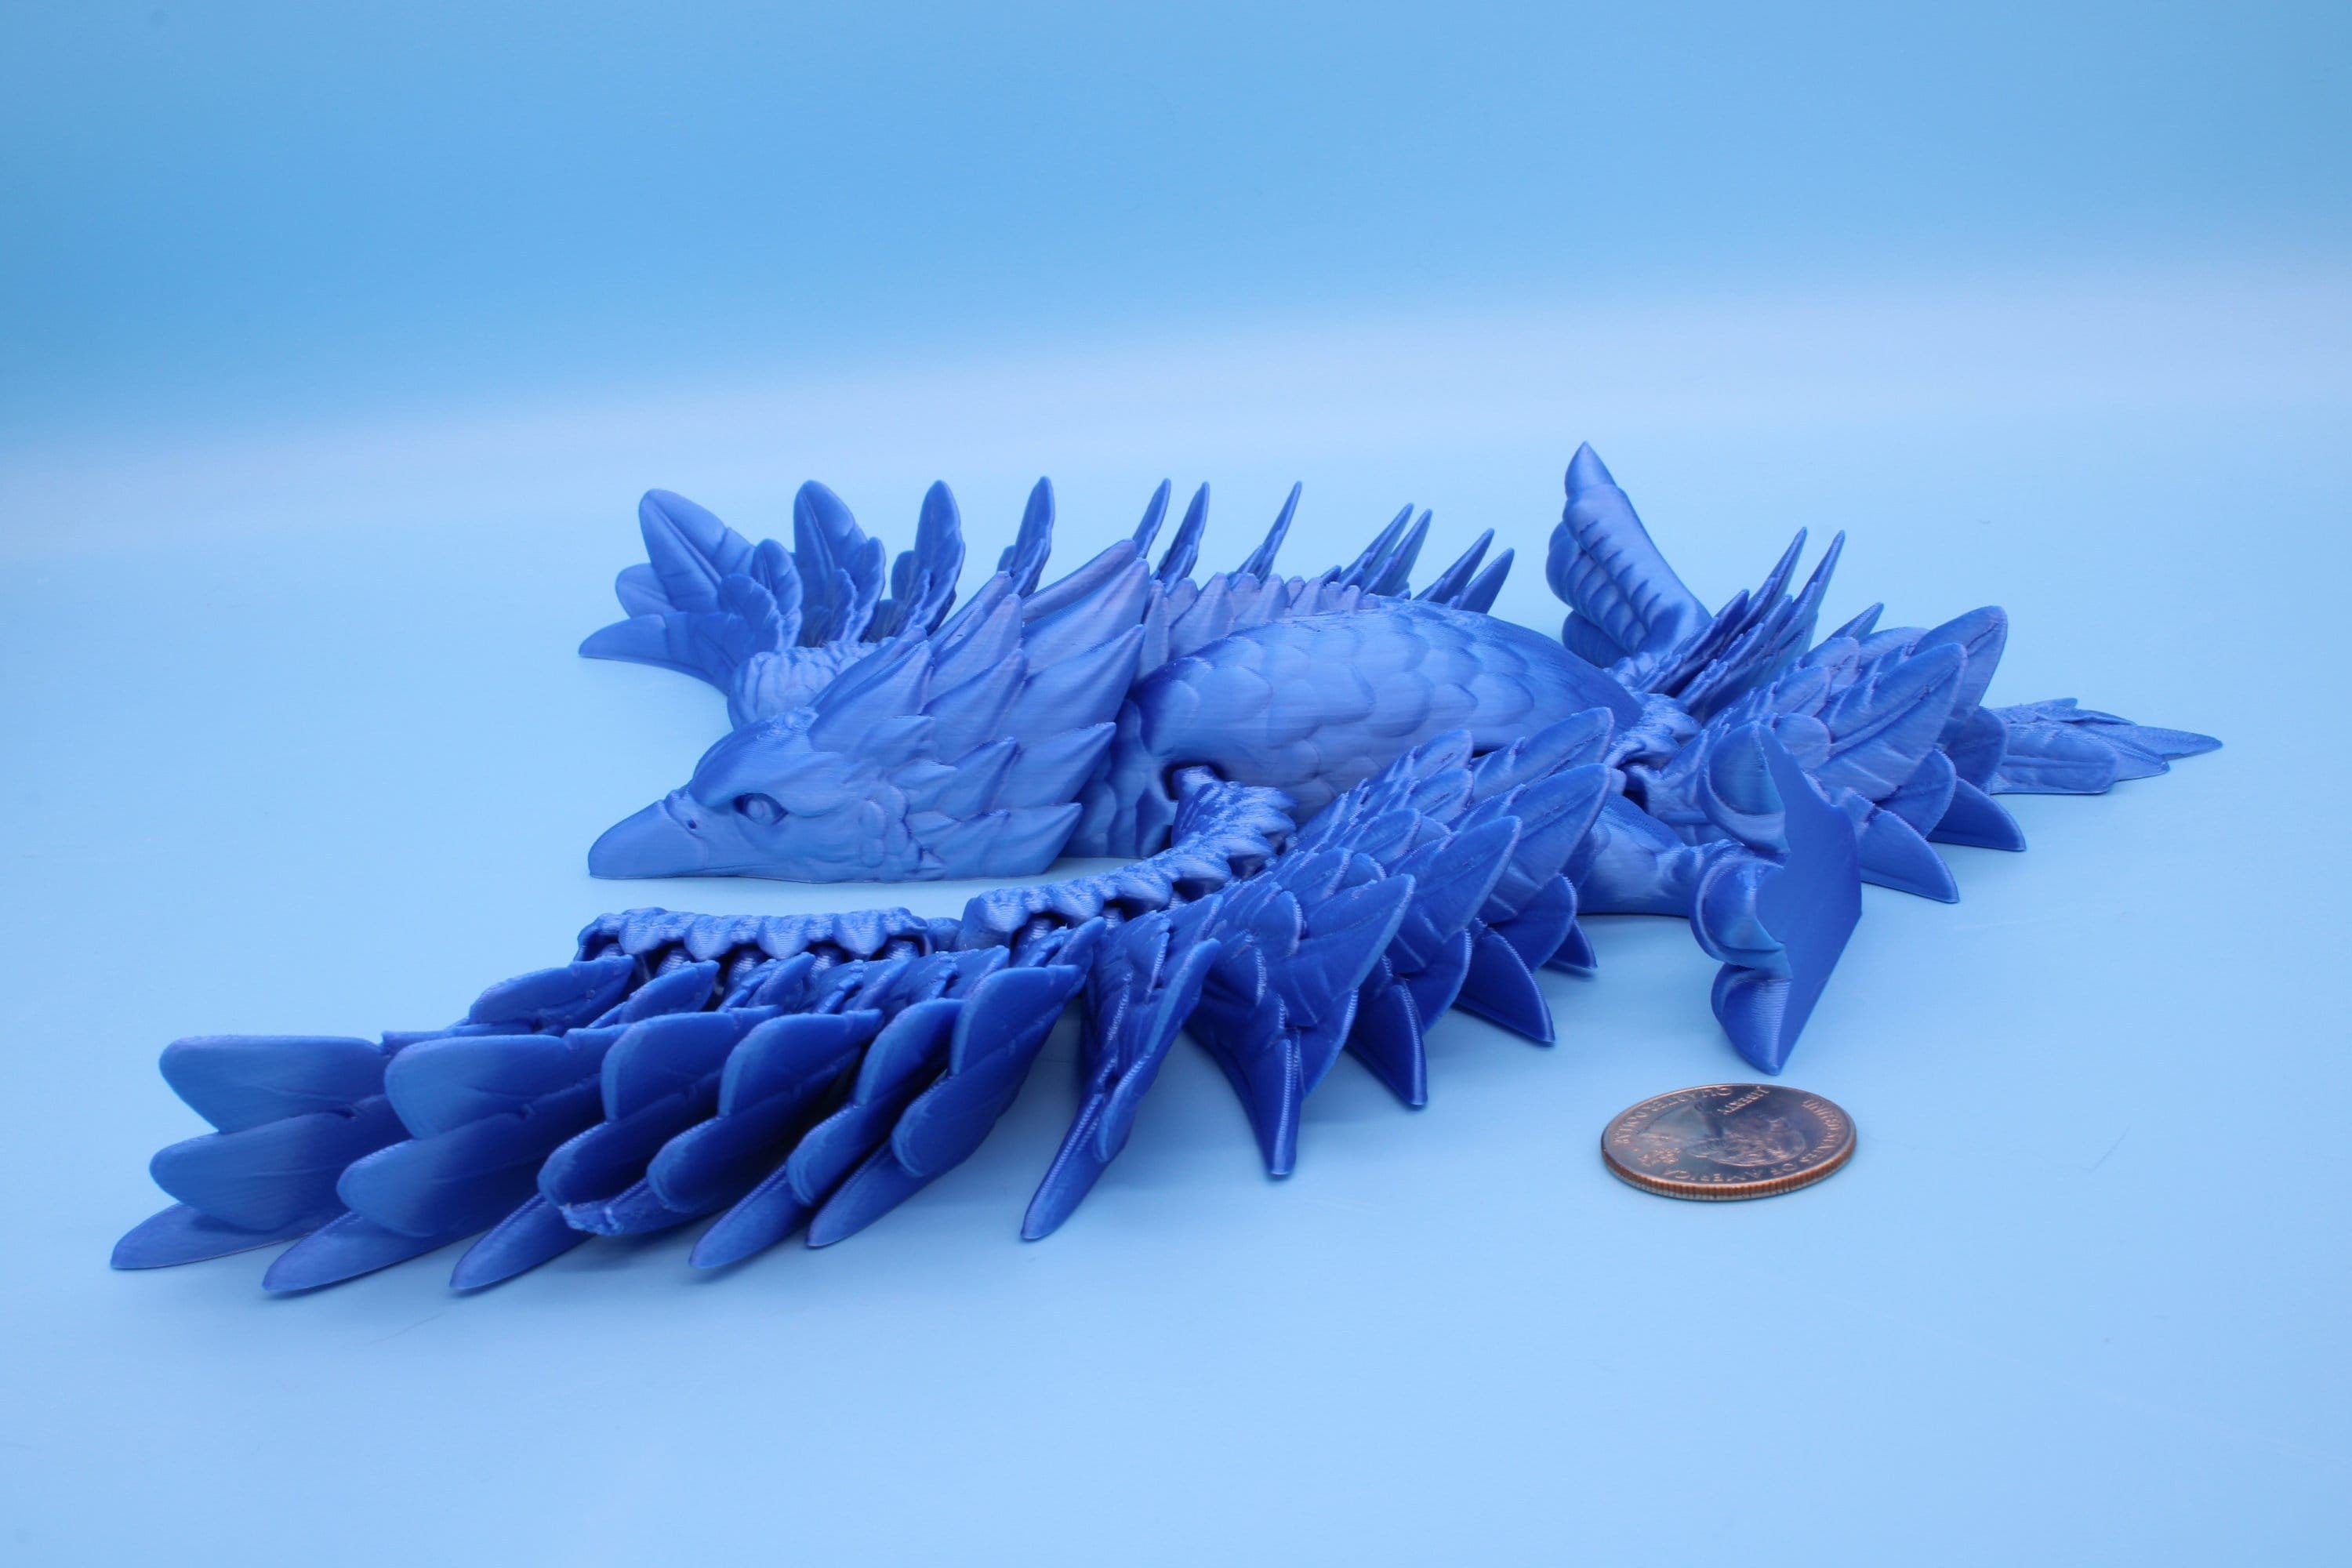 XL Phoenix Blue | Cute Flexi | Unique 3D printed. | Great Articulating fidget toy, desk, sensory toy | 5.5 inch tall | 10 in wing span.